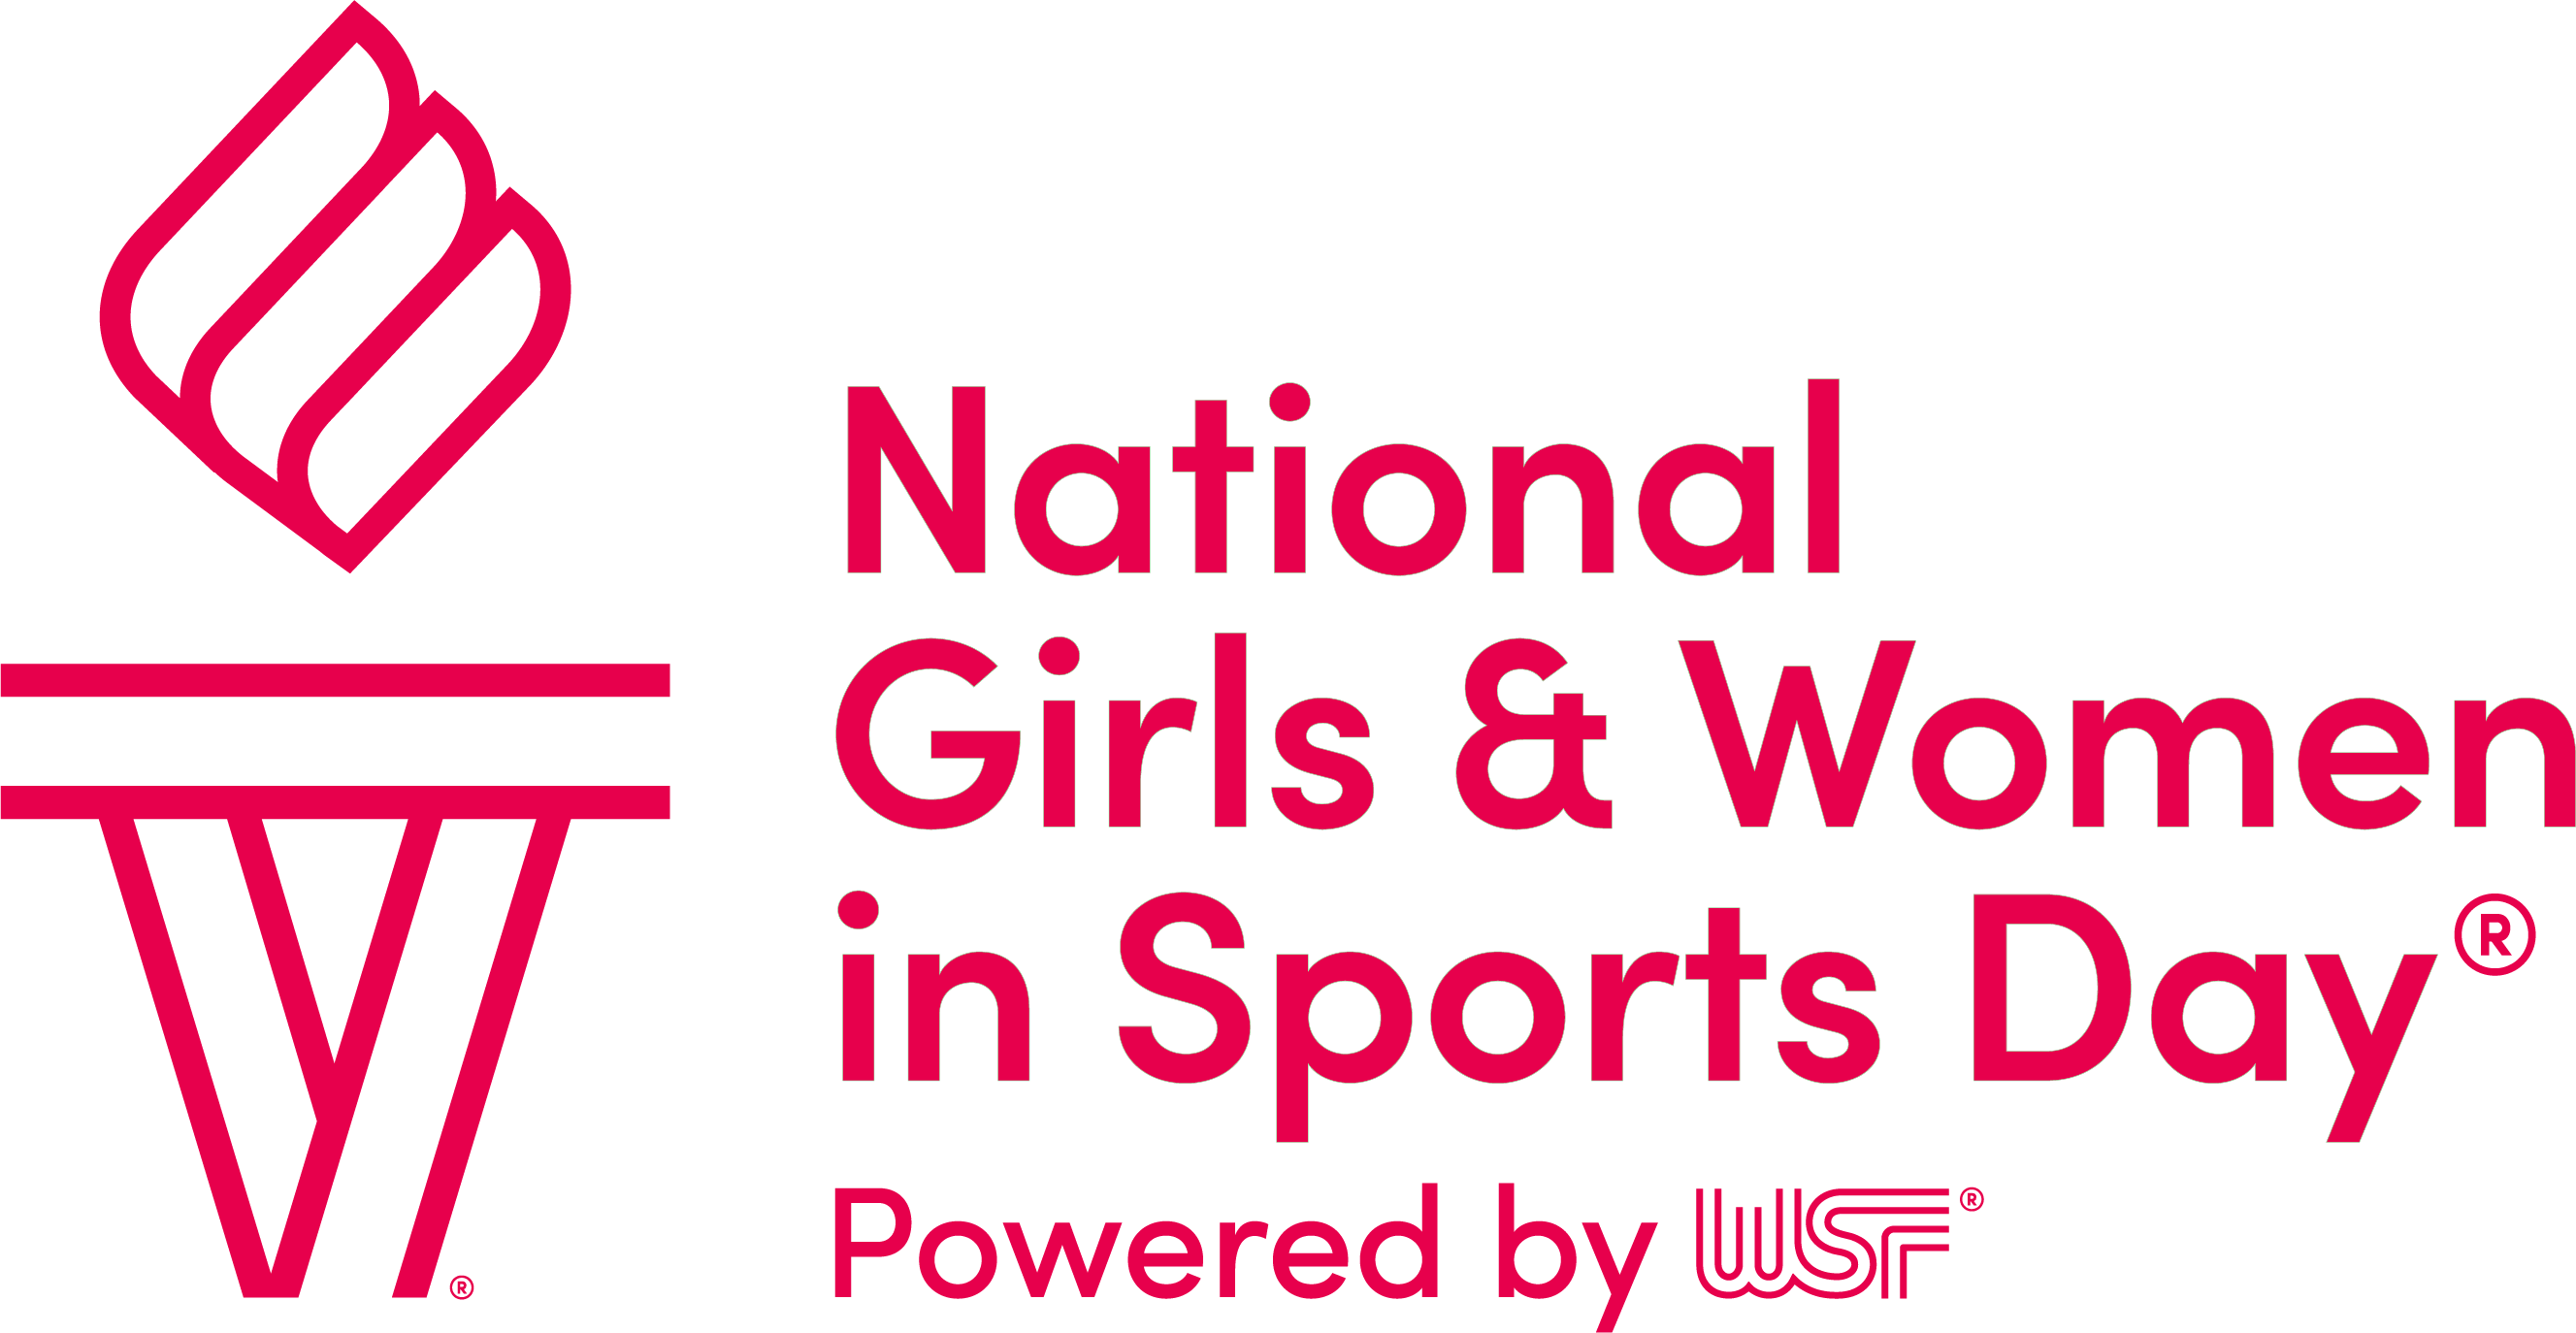 About NGWSD - Women's Sports Foundation